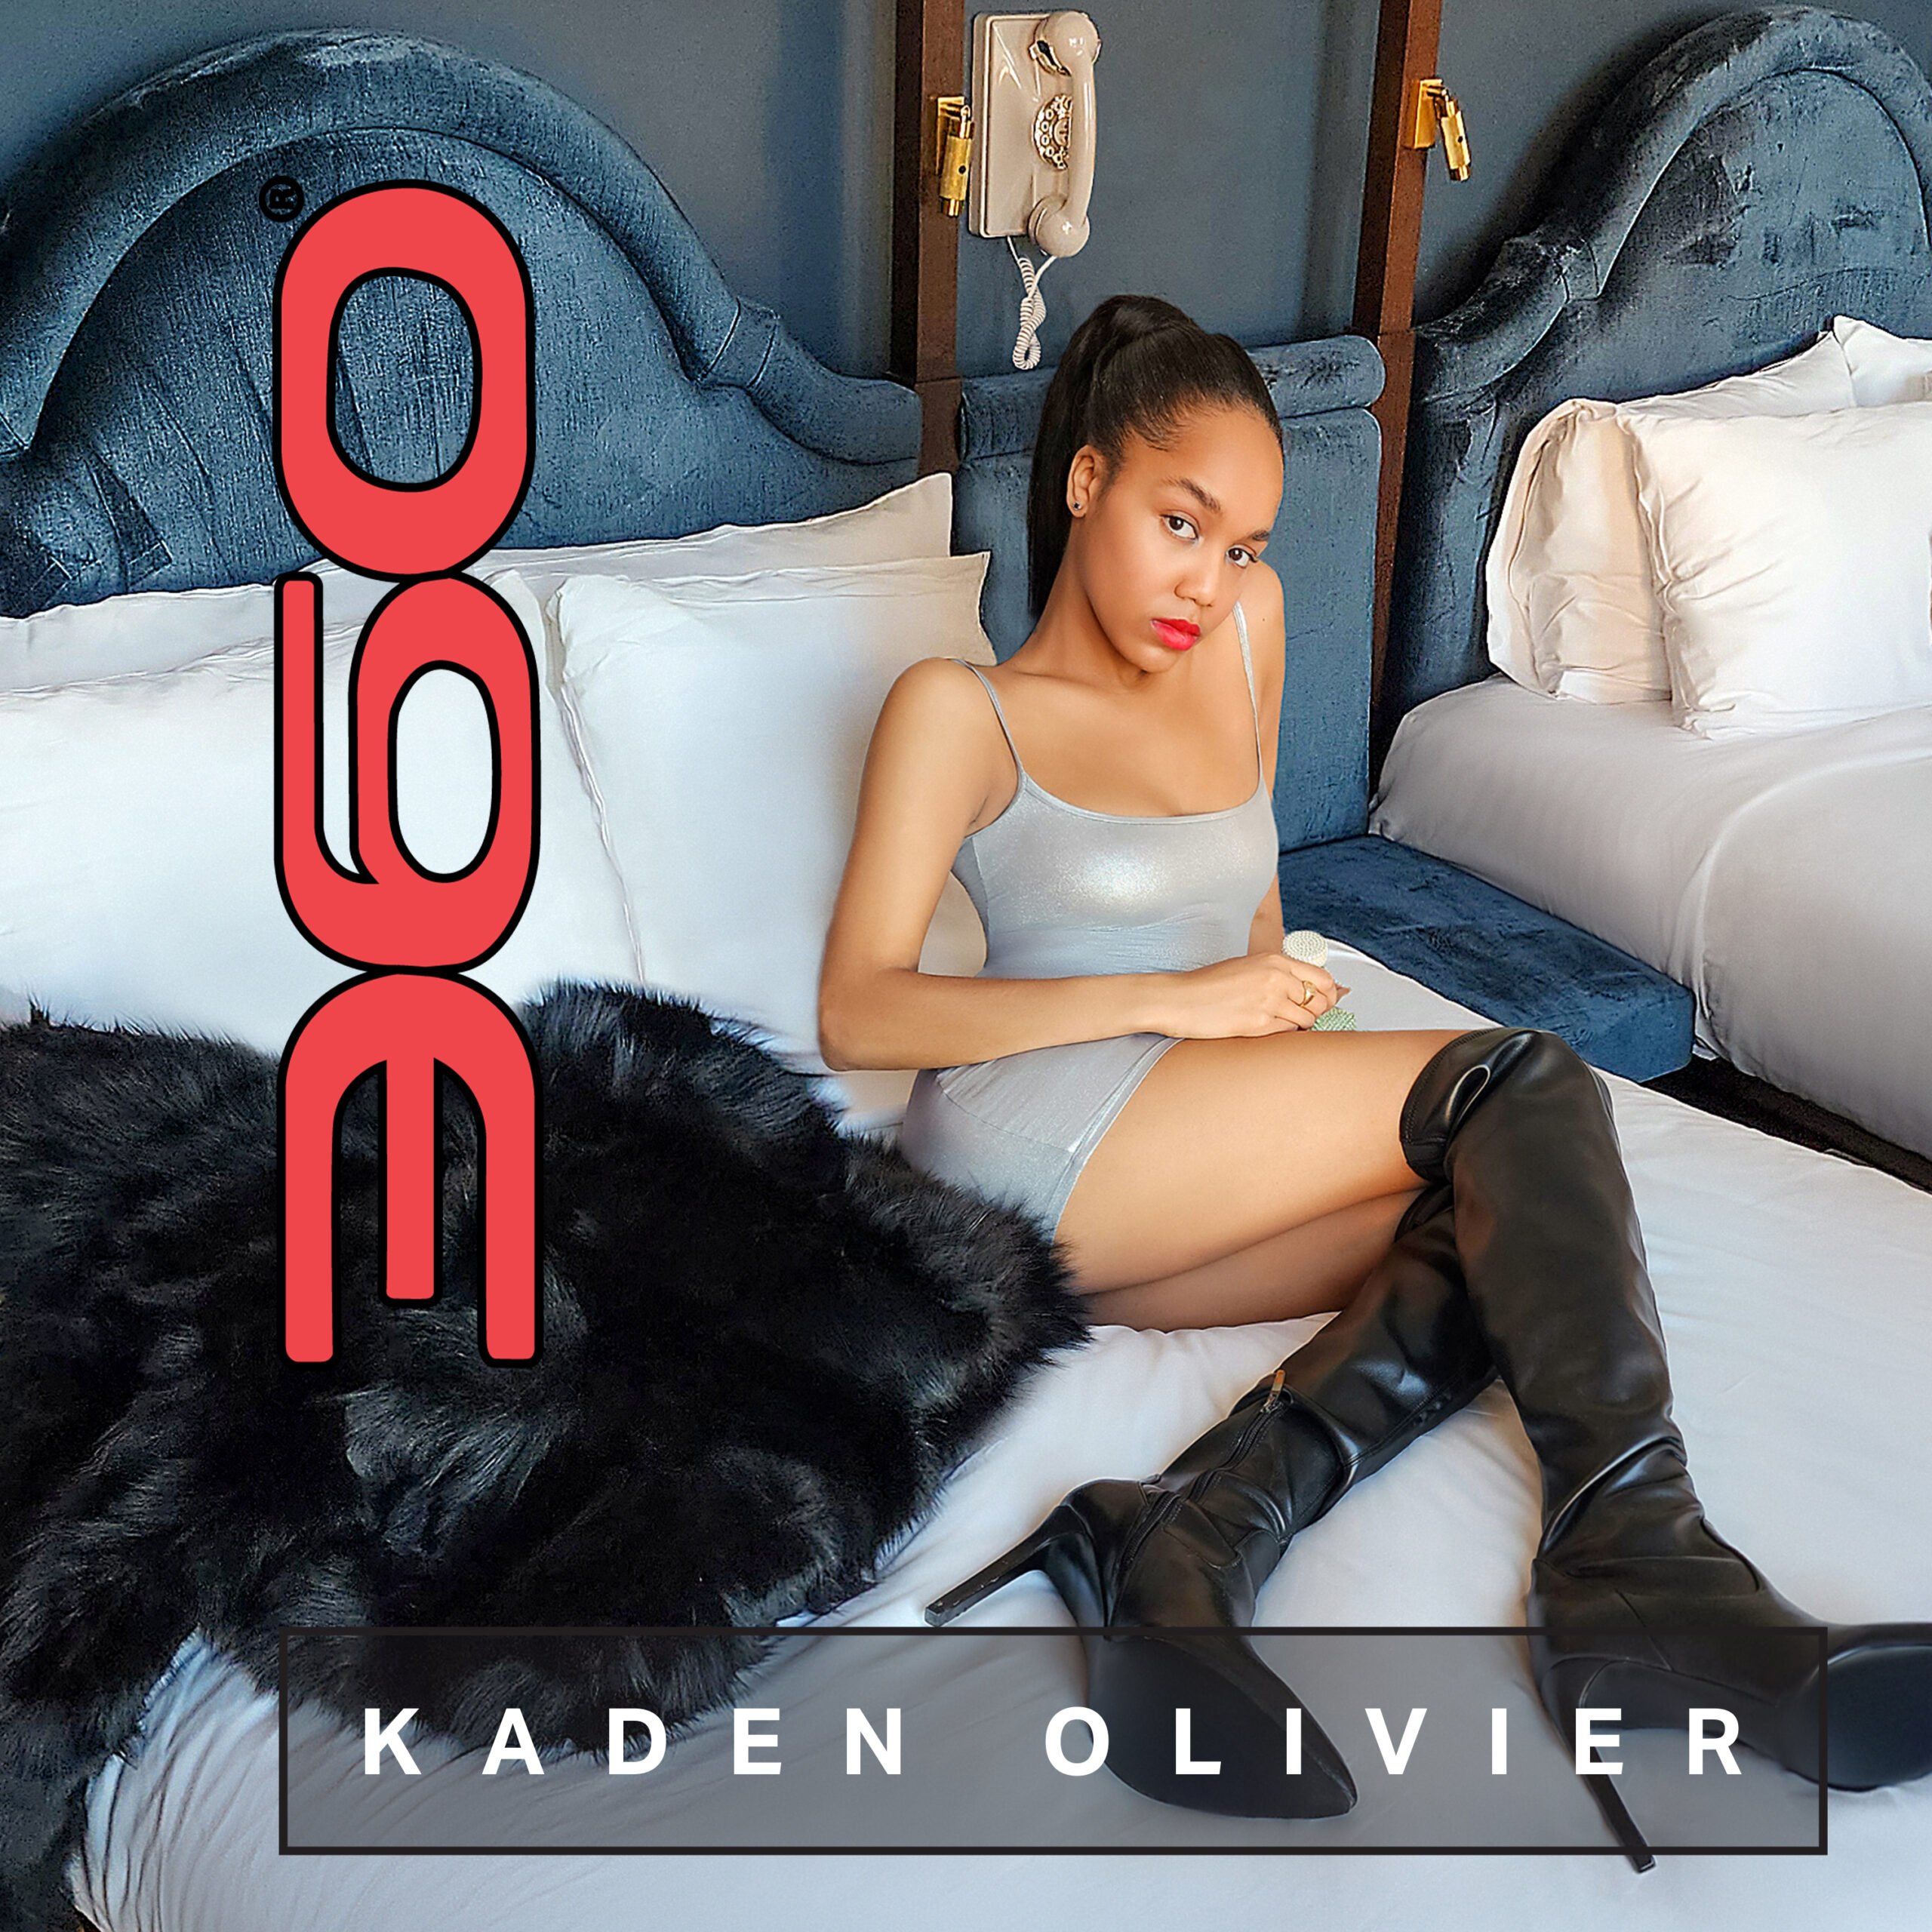 Kaden Olivier, photographed by Vaughn Lowery, at the Civilian Hotel stuns on the cover of 360 MAGAZINE.